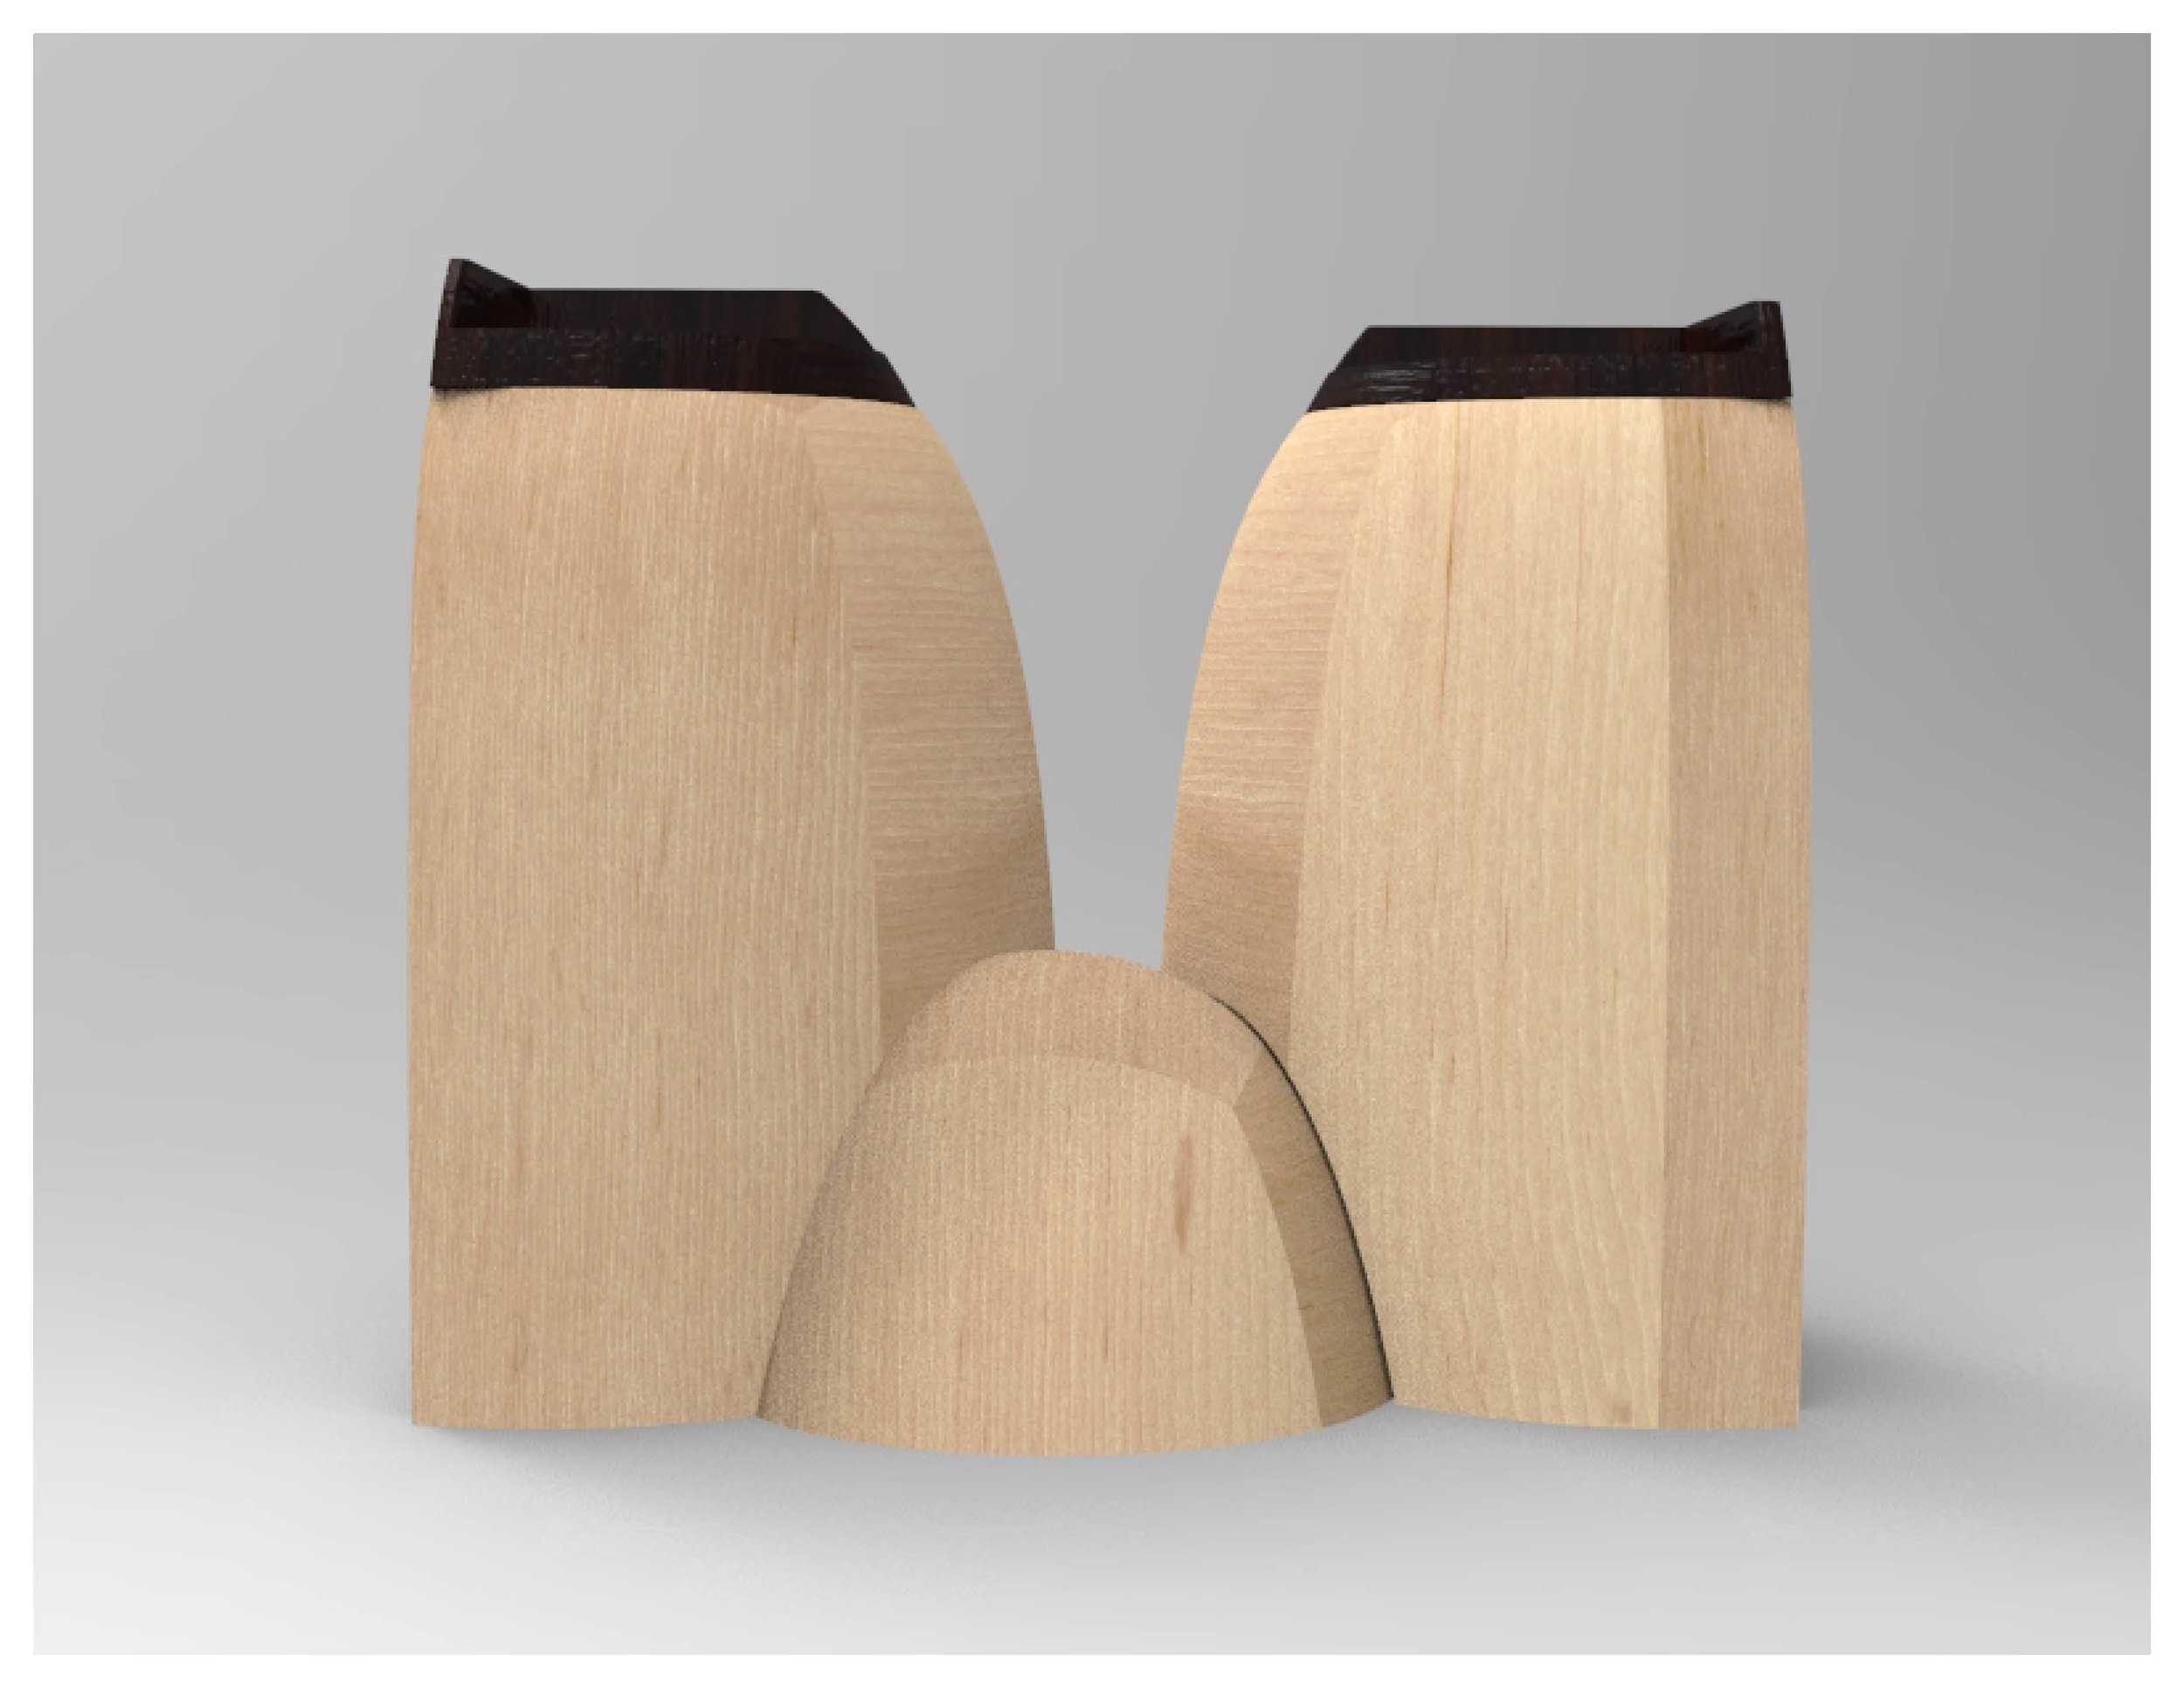 Stool Concept 3: Frontal View (Constructed)